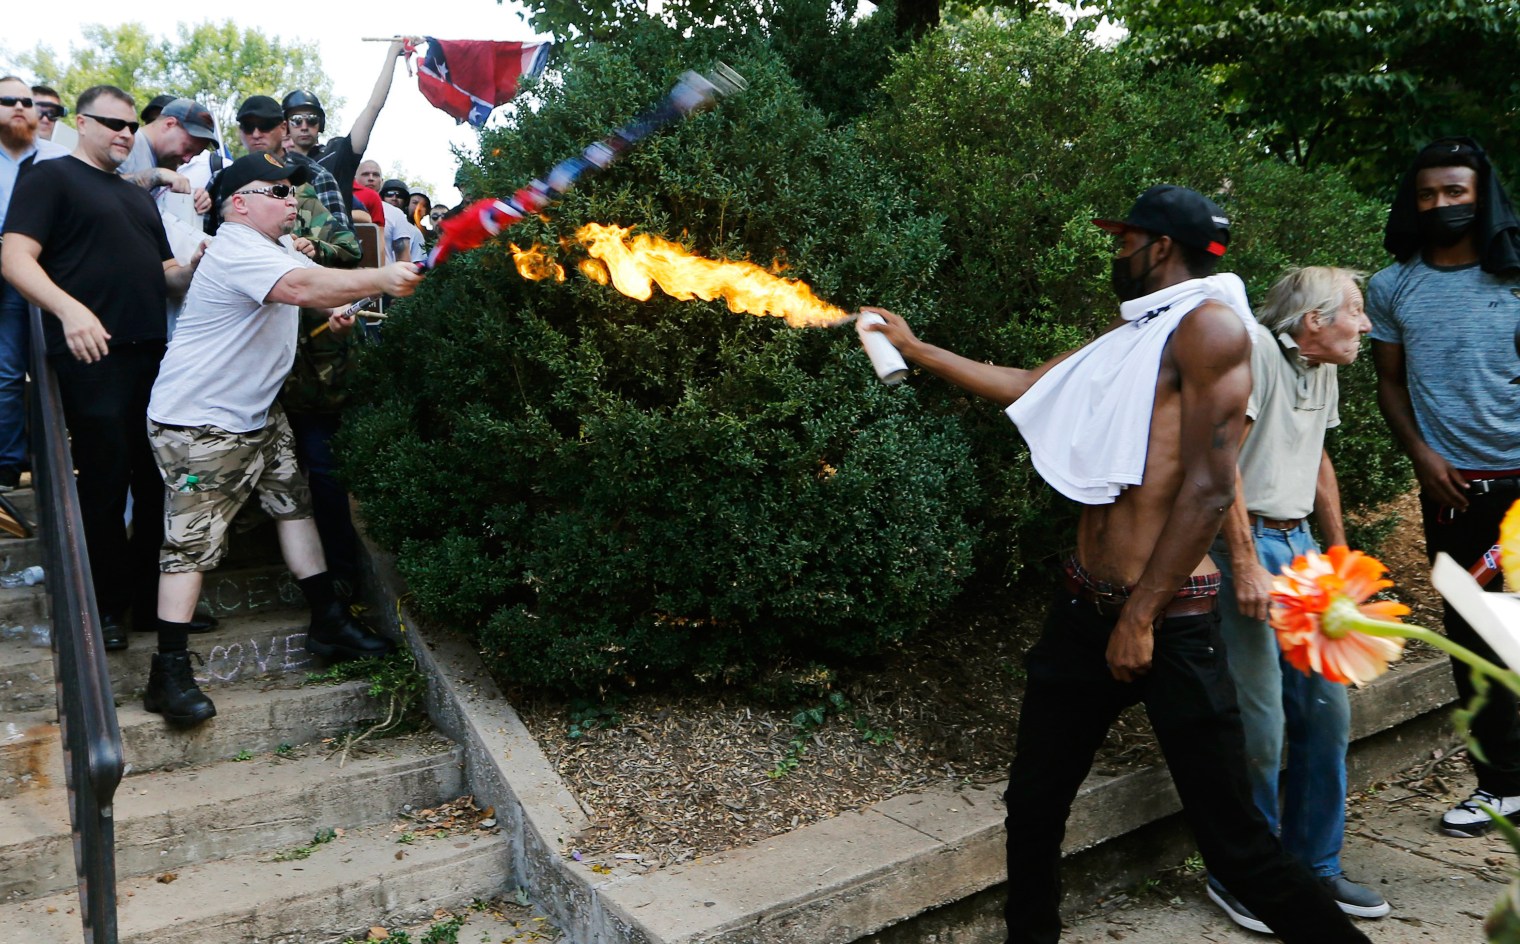  counter-demonstrator uses a lighted spray can against a white nationalist demonstrator at the entrance to Lee Park in Charlottesville, Va., on Aug. 12, 2017.